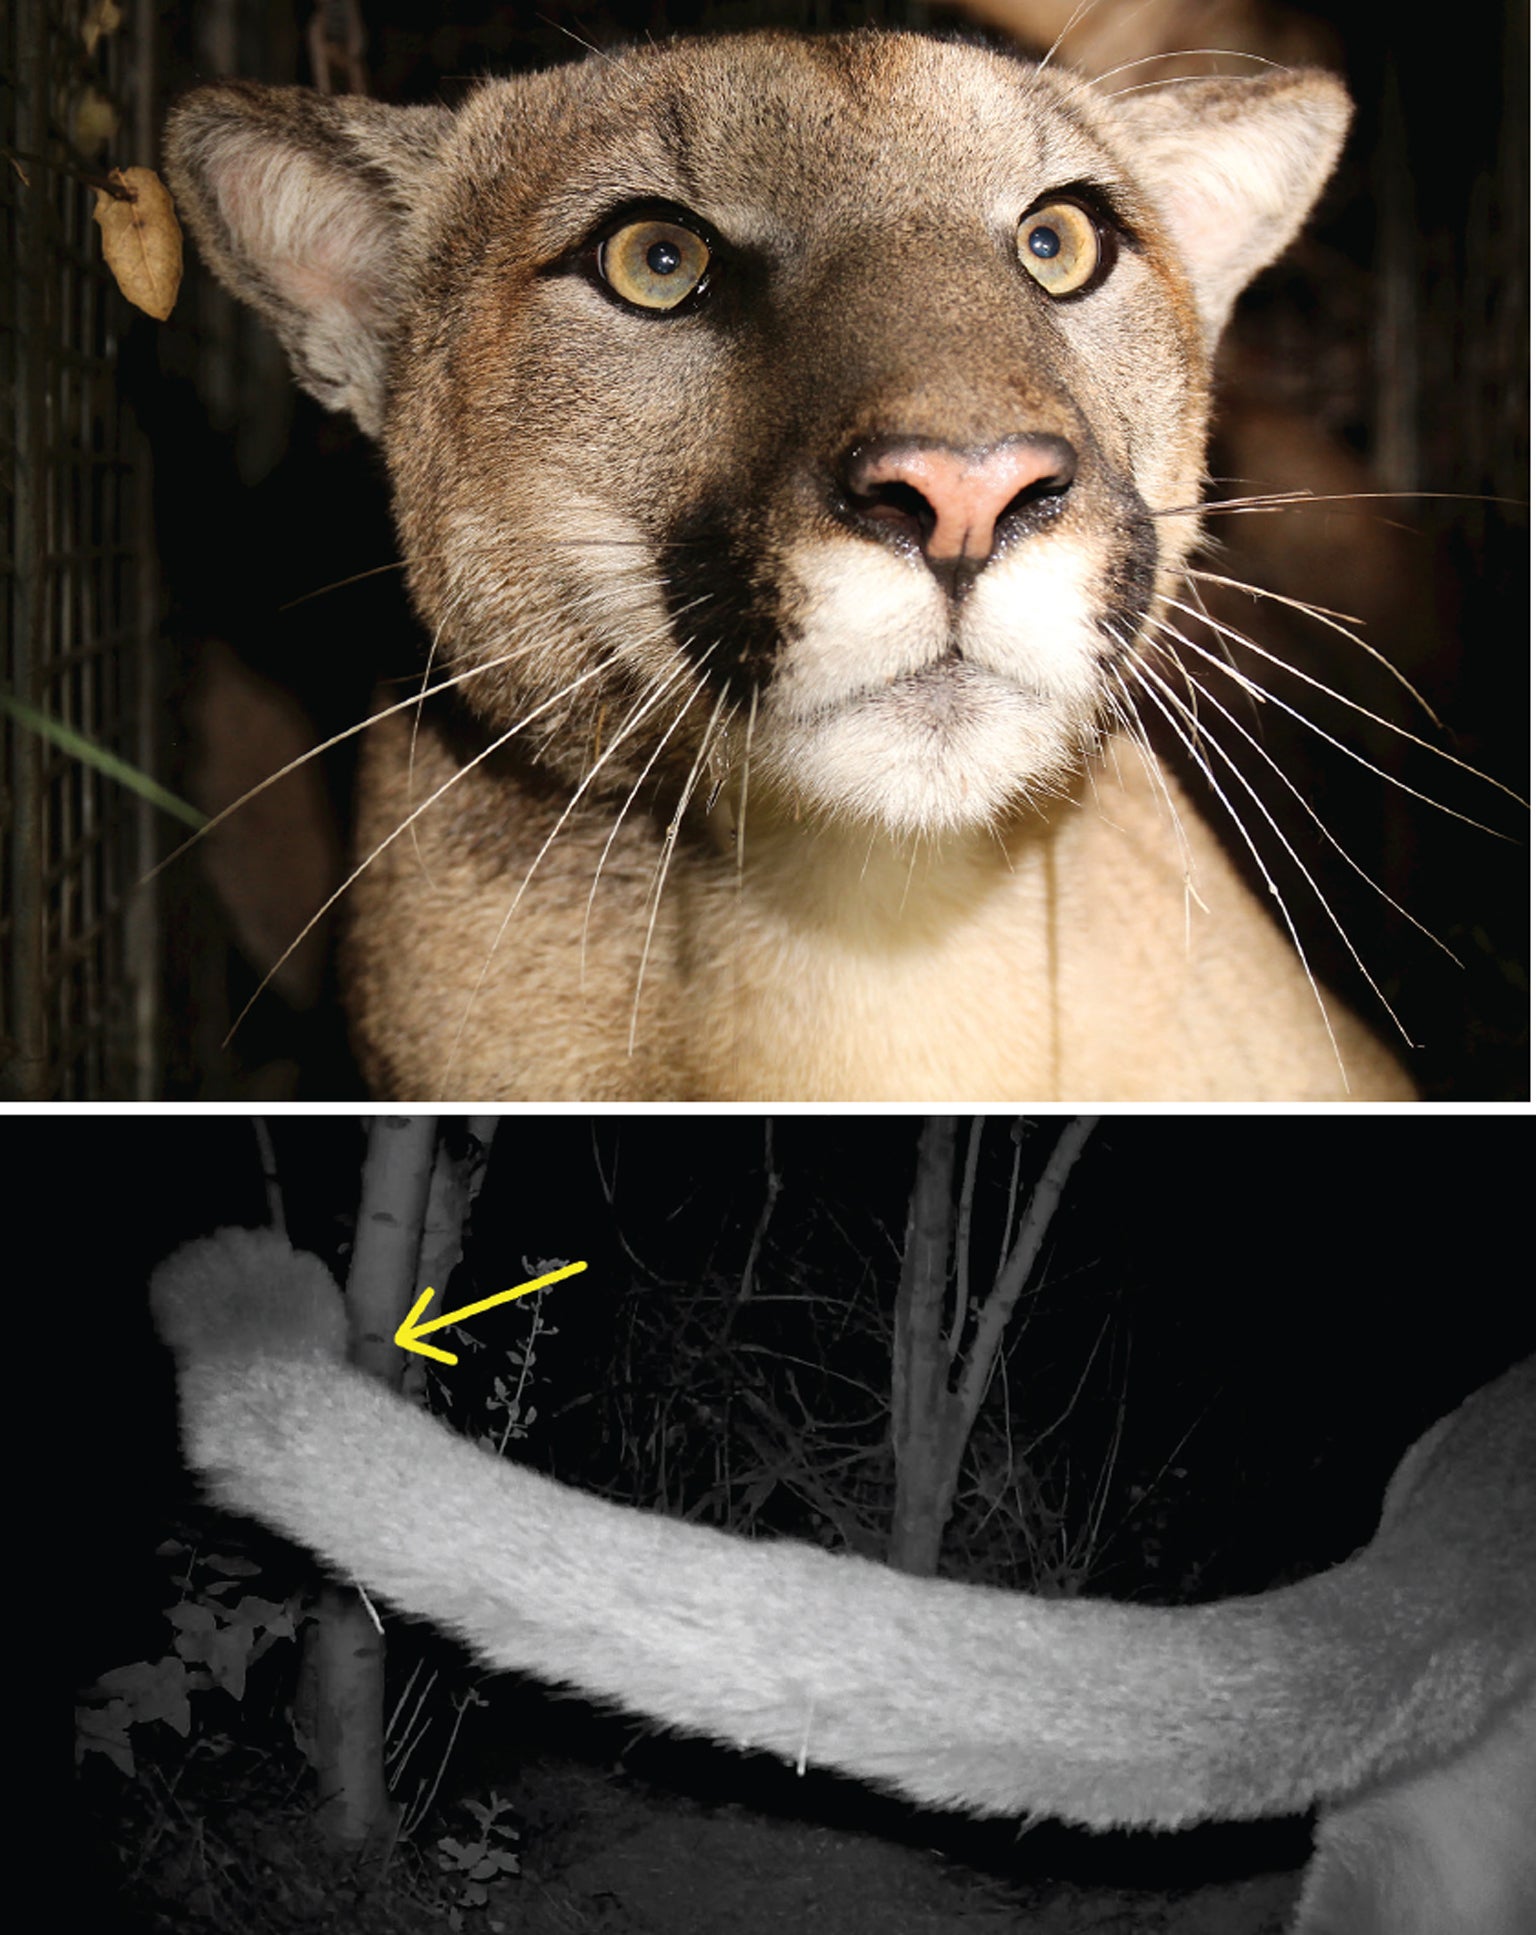 World’s Largest Wildlife Bridge Could Save Mountain Lions